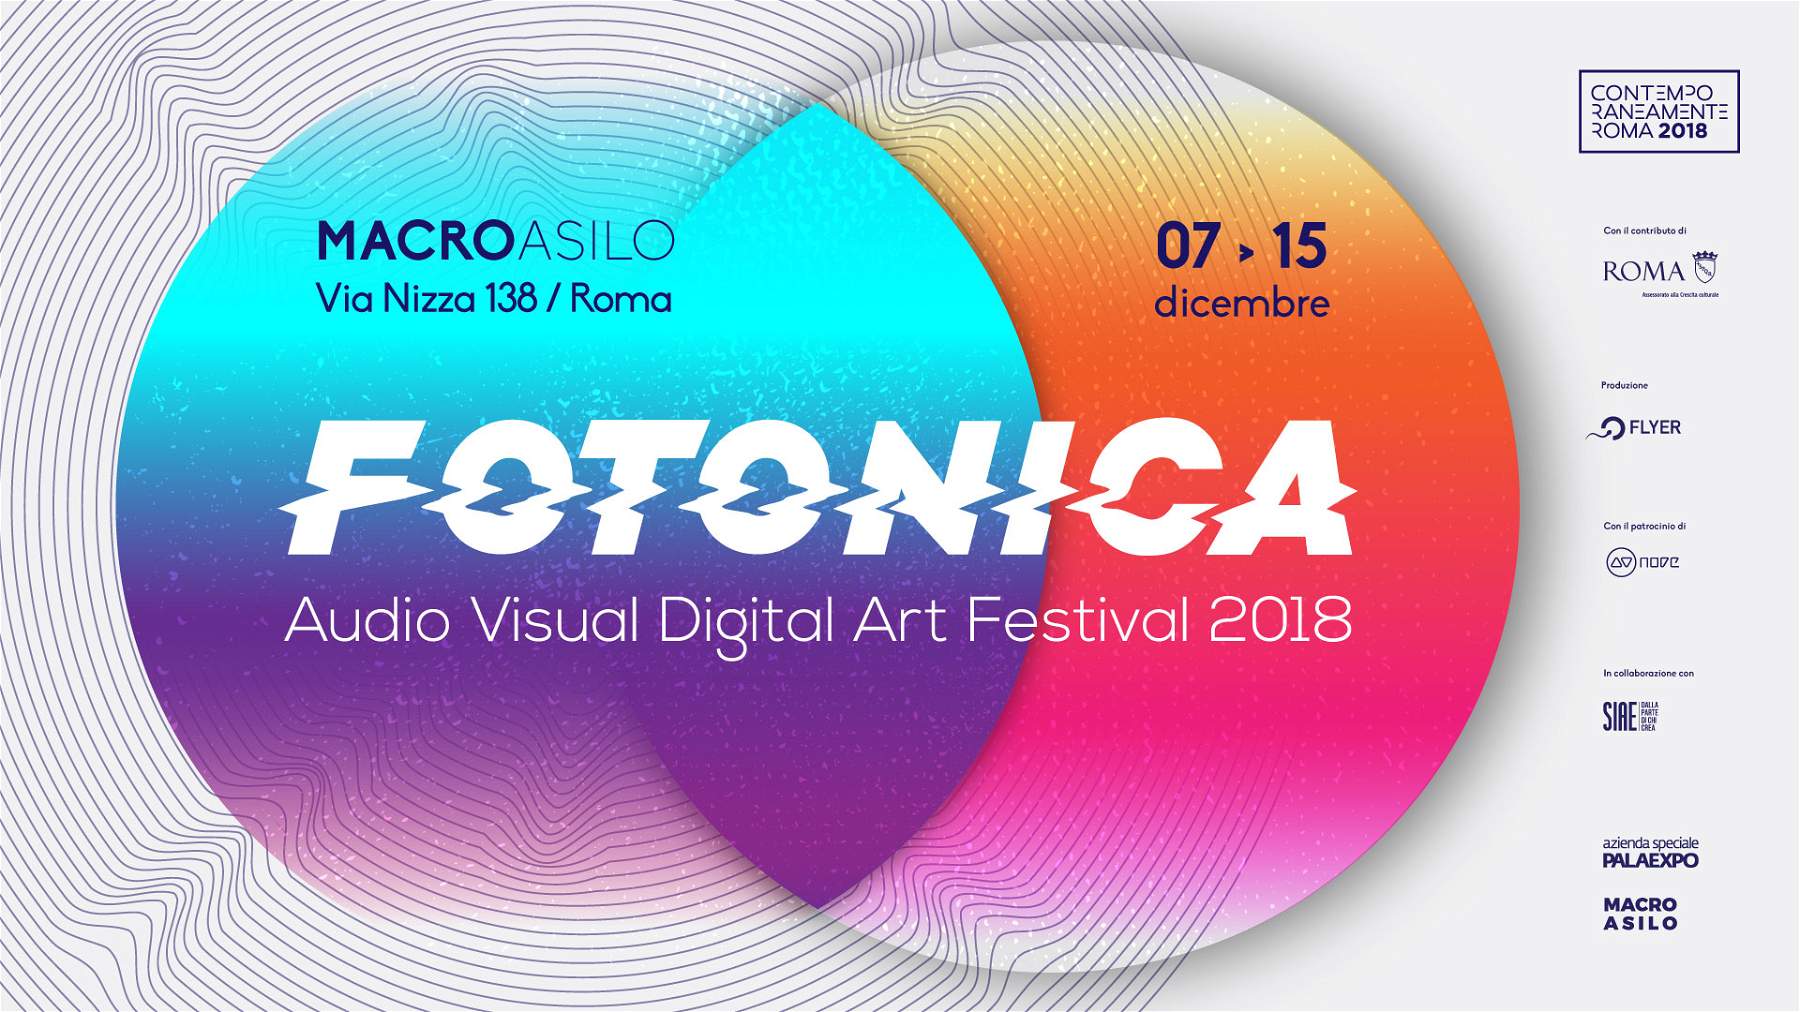 The second edition of the Fotonica festival at the MACRO Asilo in Rome